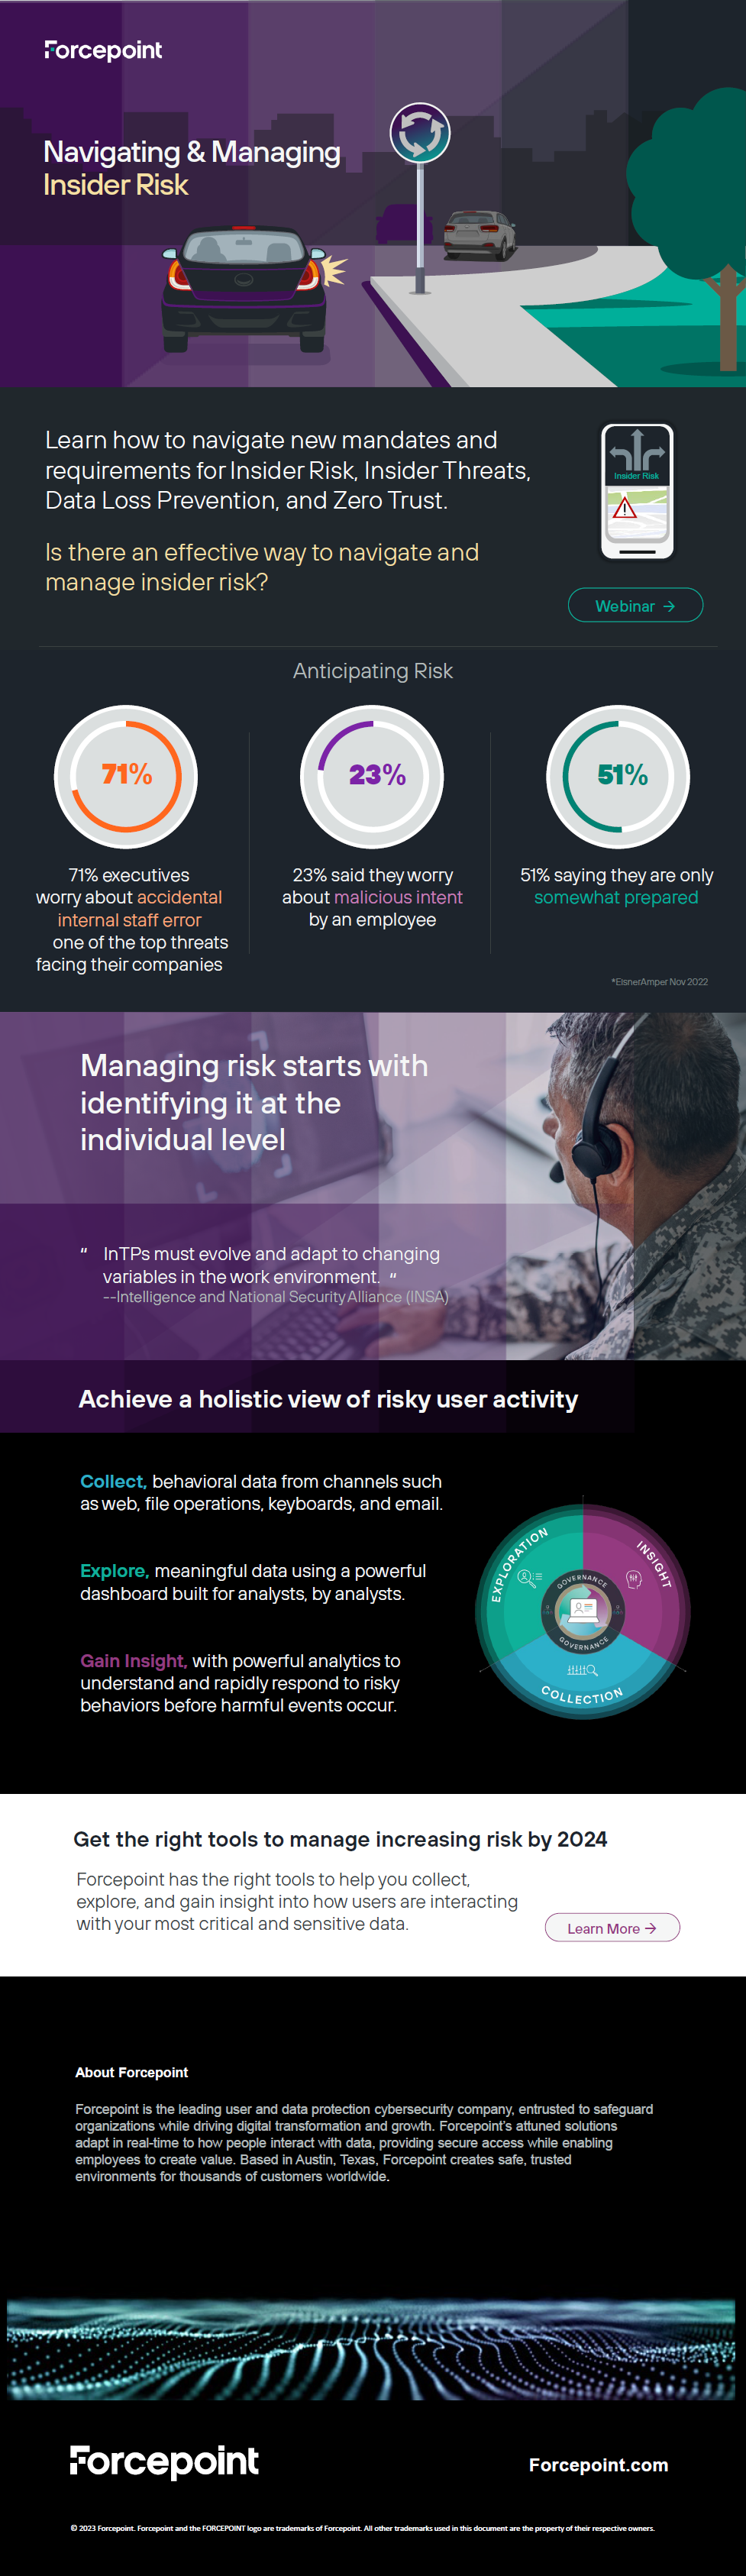 Forcepoint - Navigating and Managing Insider Risk in 2023